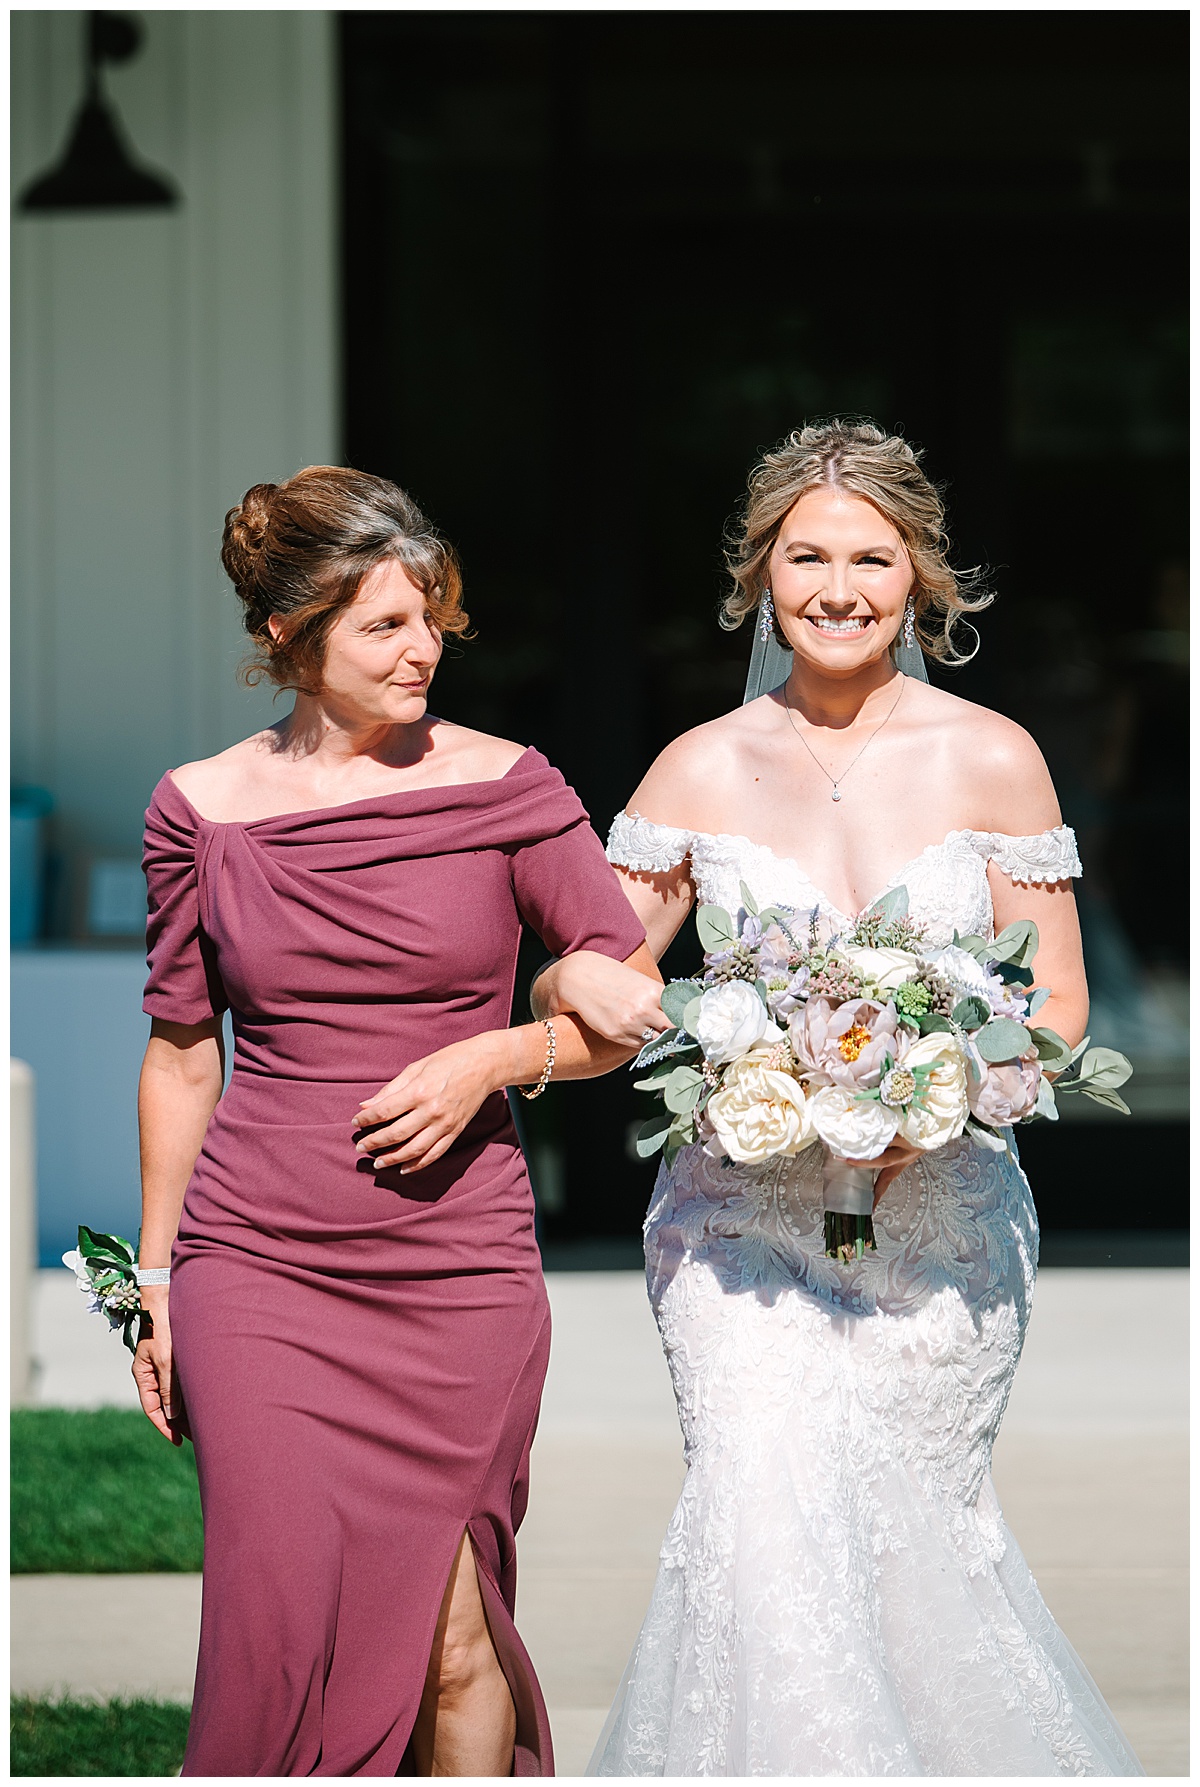 Mom walks Daughter down the aisle by Michigan Wedding Photographer